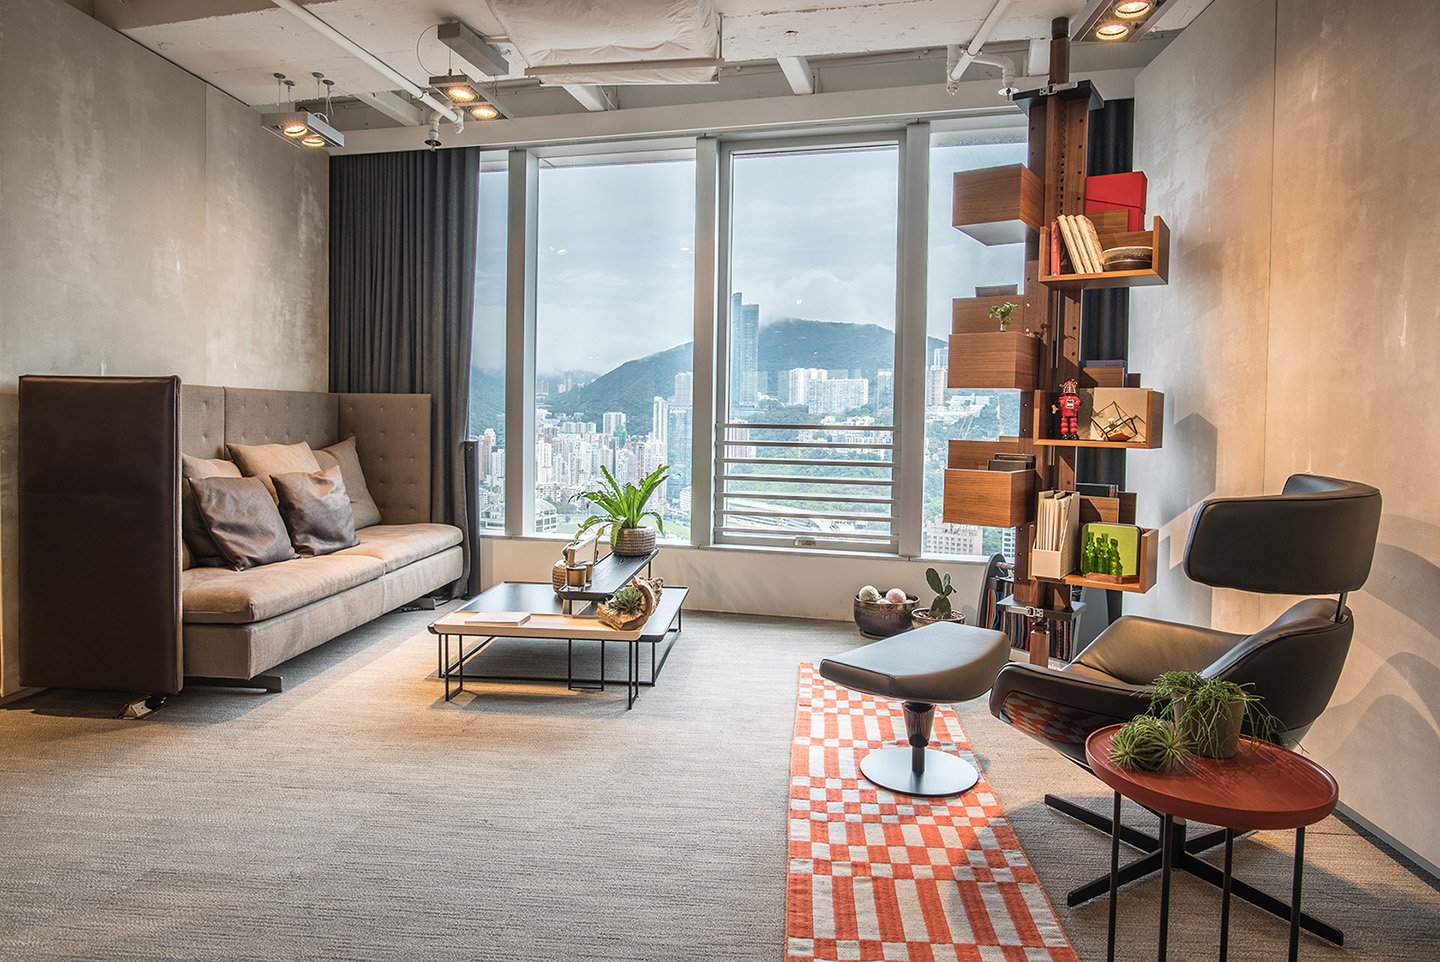 We are proud and excited to announce that our newly renovated Haworth Hong Kong showroom is ready for visit again. Our showroom is located In the heart of the Pearl of the Orient, Wan Chai, an area that is deeply immersed with both Eastern and Western cultural atmosphere. 

Haworth Hong Kong showroom focuses on the individual needs and demonstrates workspace designs that provide users various work settings to easily adapt the needs of every user and eventually navigate us to the ultimate organic workplace solutions. Nevertheless, the flexibility of the showroom allows the users to swiftly travel between focus, collaboration, and relaxation.

By displaying Haworth’s and its partners’ latest and greatest products through the creative layout settings and the vivid color contrast designed by our top designer, Liz Teh, Haworth Hong Kong showroom has been upgraded once again to a trendy, innovative, and organic workspace. 